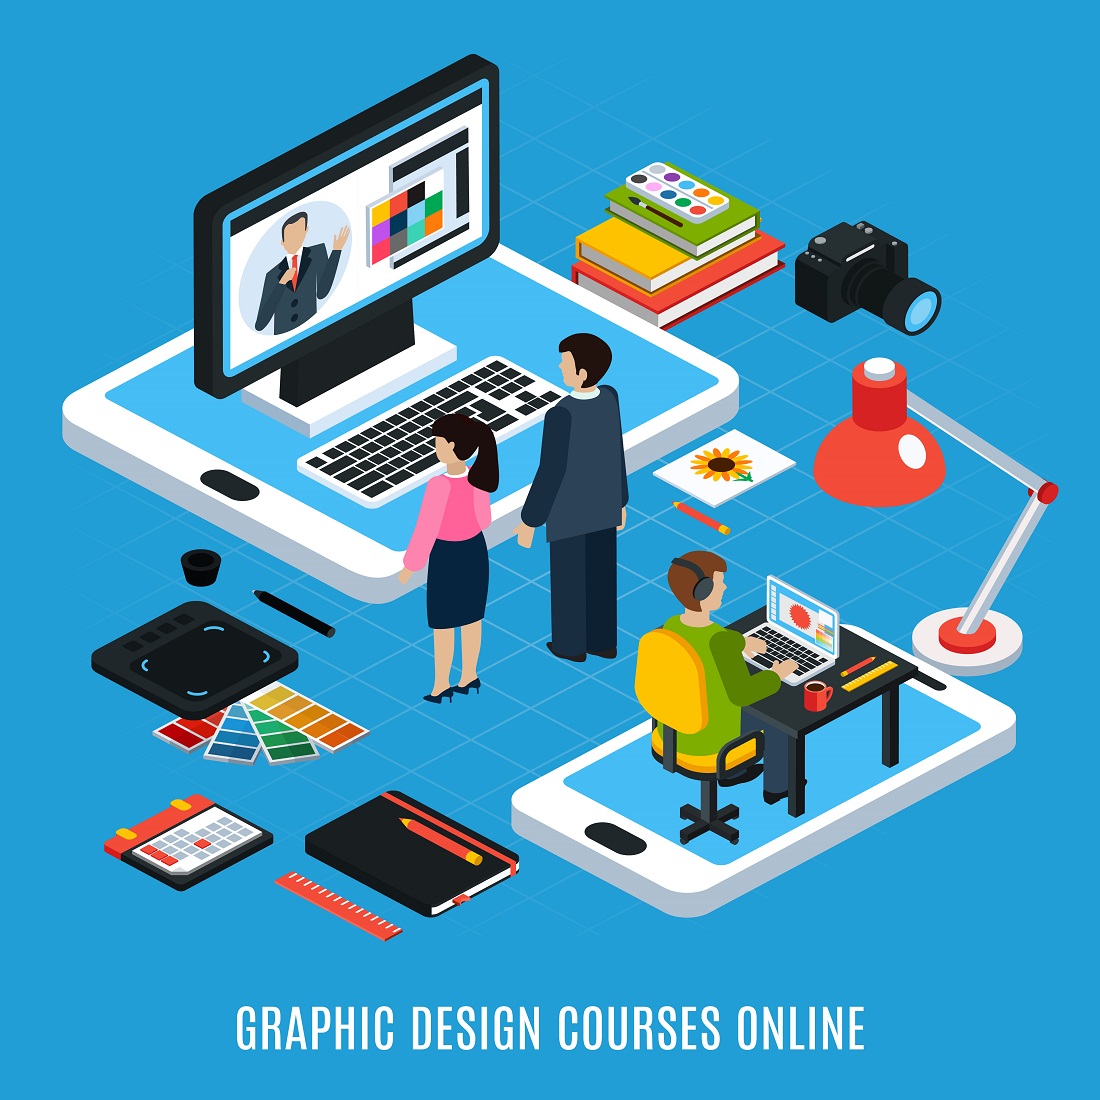 Online graphic design courses isometric concept with students computer tablet swatches cover image.